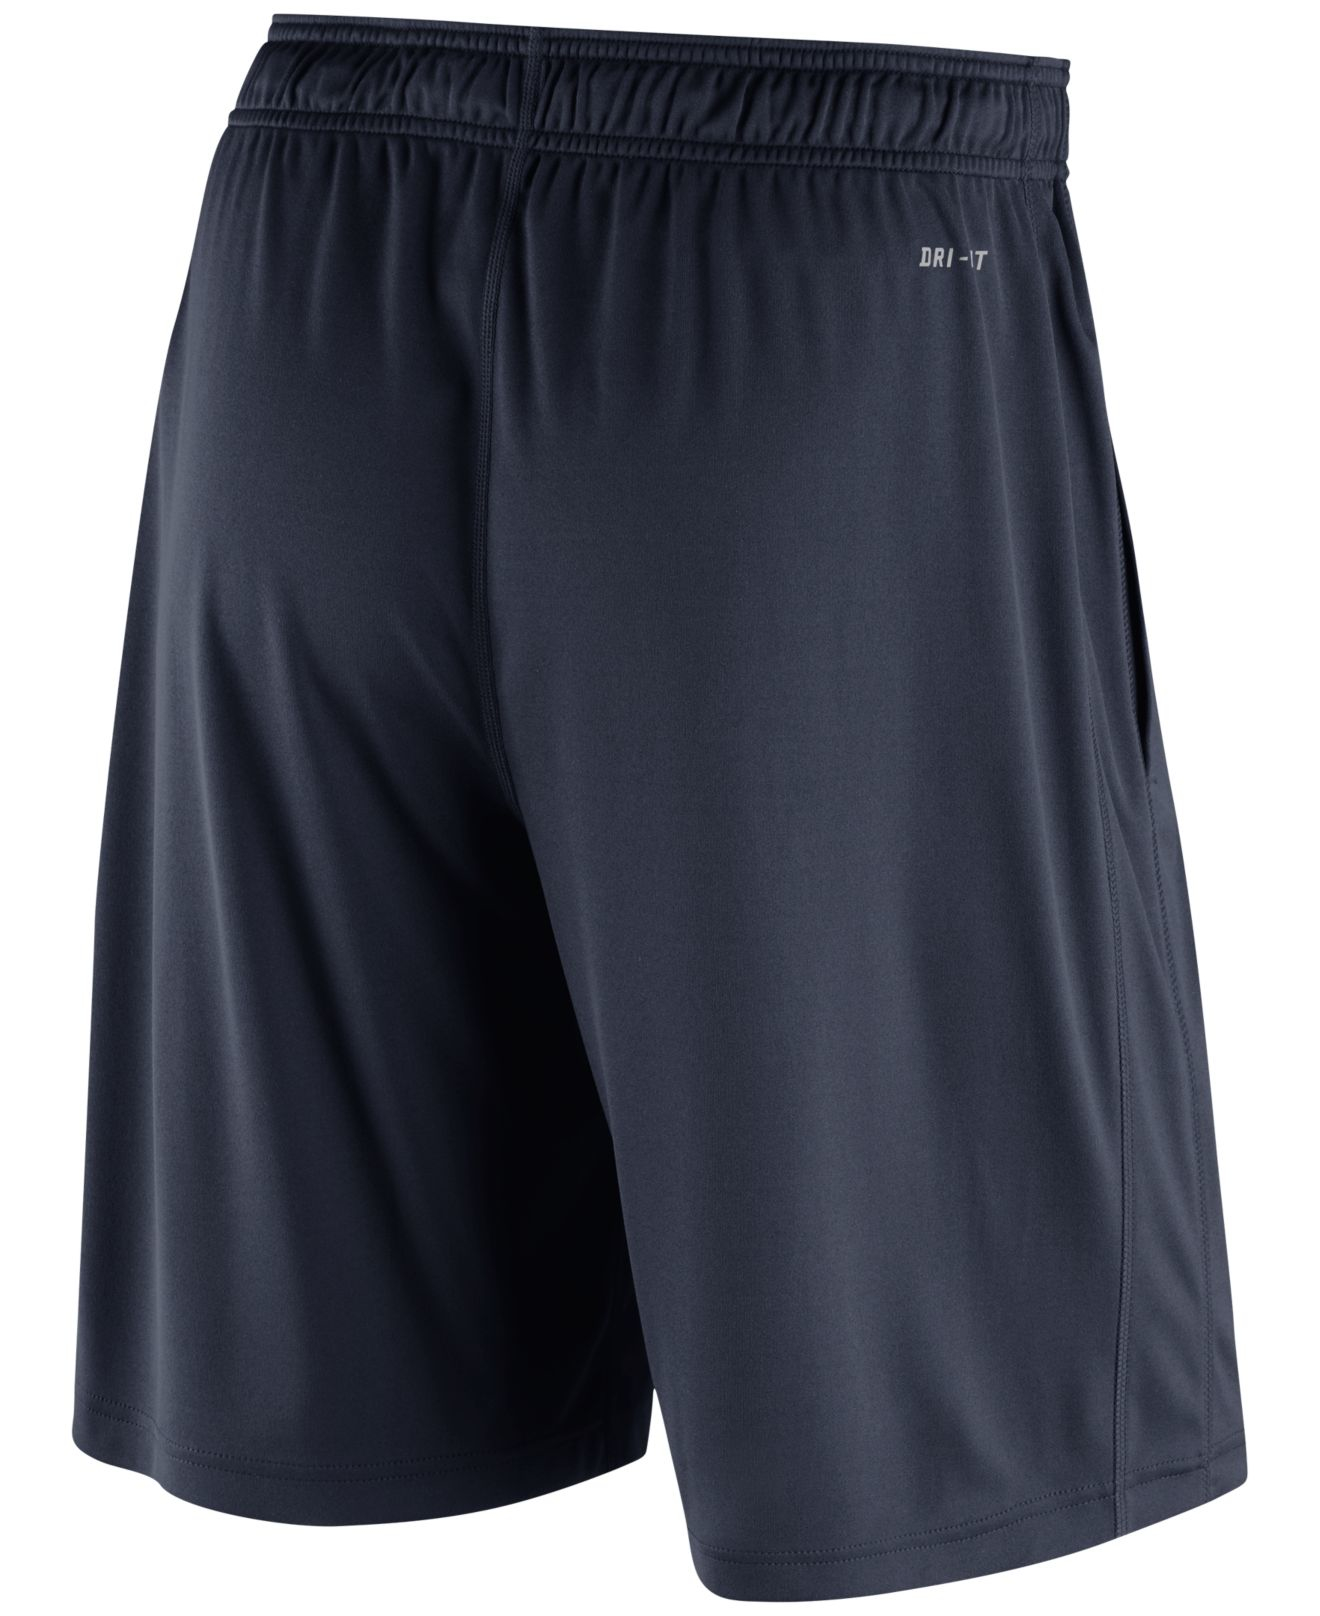 Lyst - Nike Men's Chicago Bears Practice Fly 3.0 Dri-fit Shorts in Blue ...